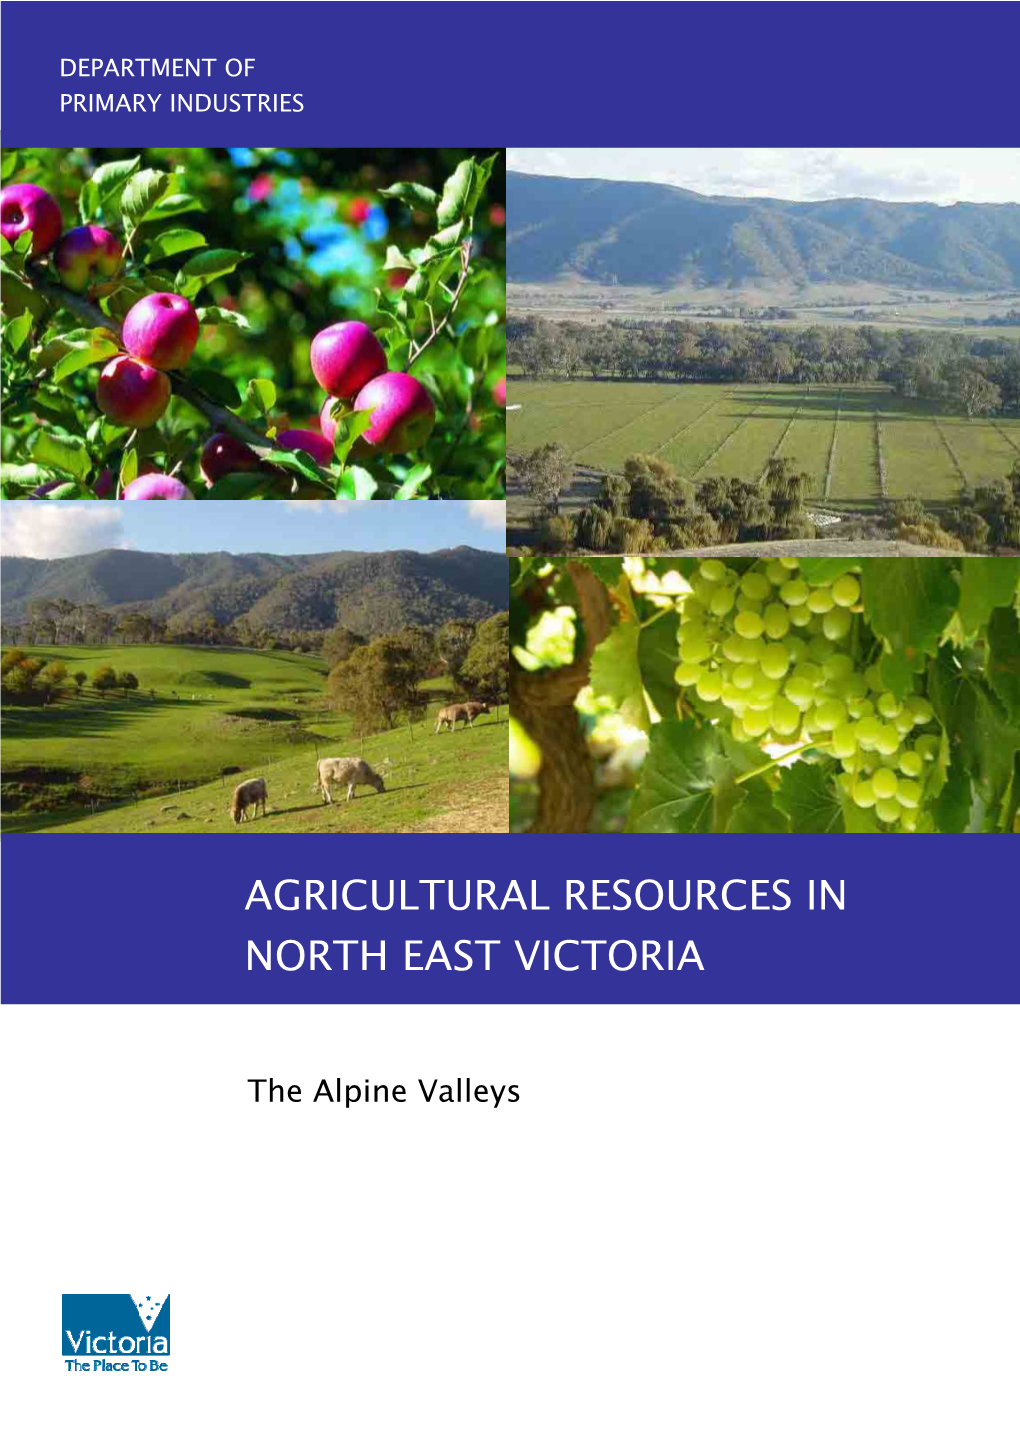 AGRICULTURAL RESOURCES in NORTH EAST VICTORIA: the Alpine Valleys DPI Agribusiness Group I Impacted on Their Water Use Efficiencies